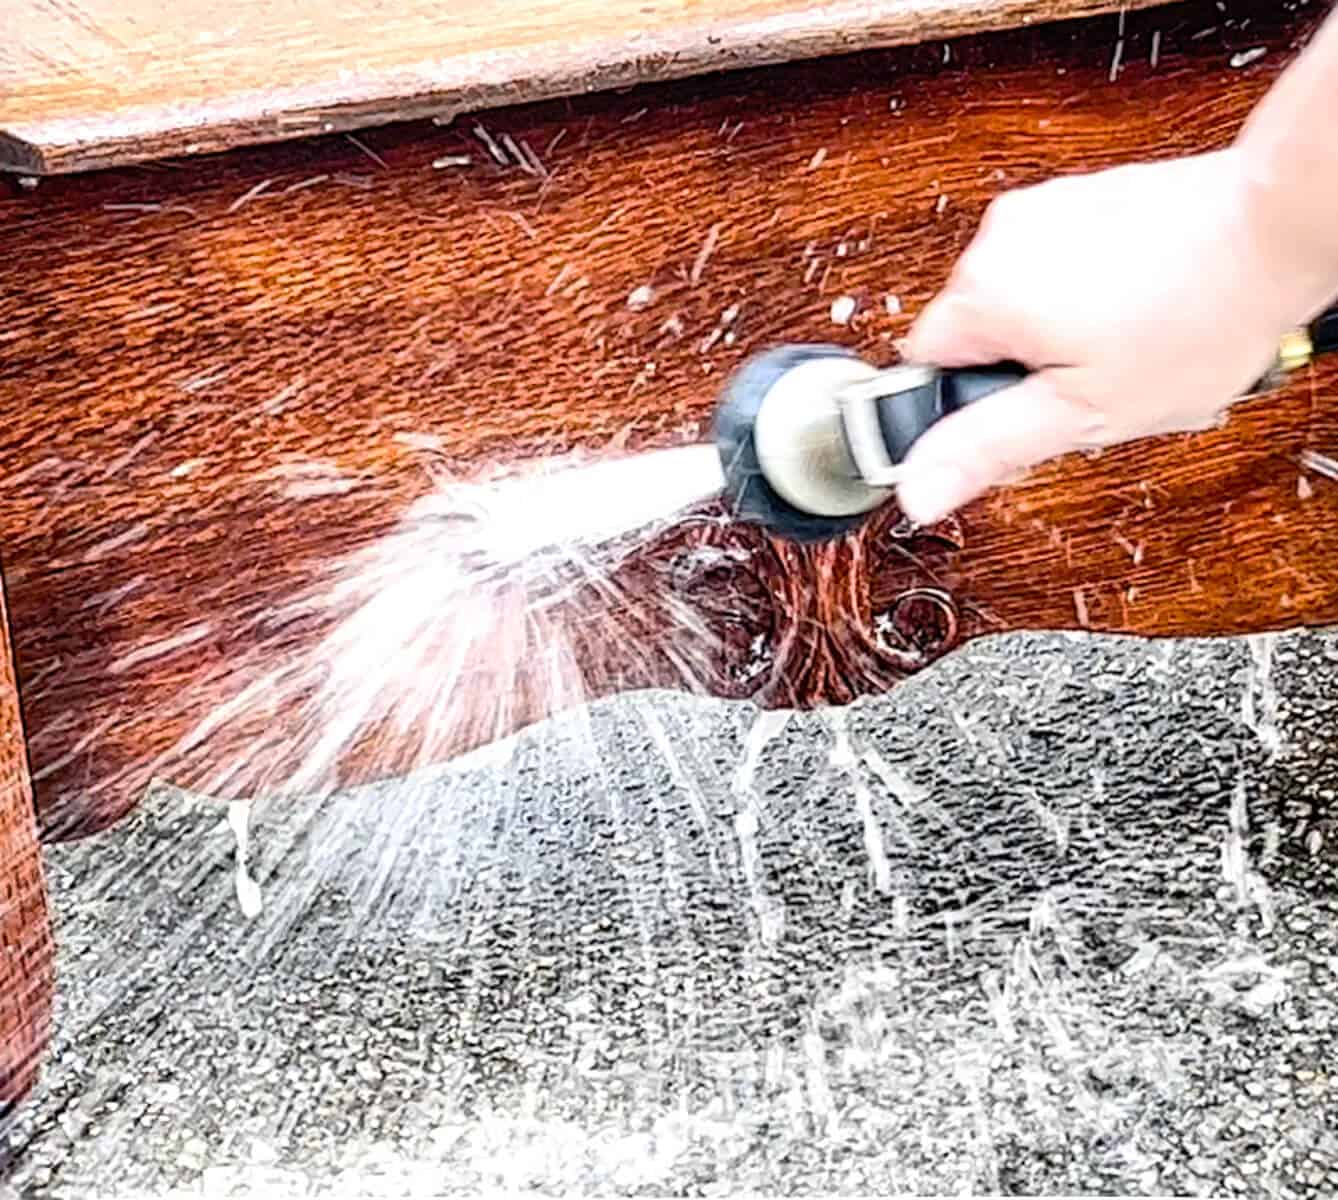 using a hose to rinse oven cleaner off wood